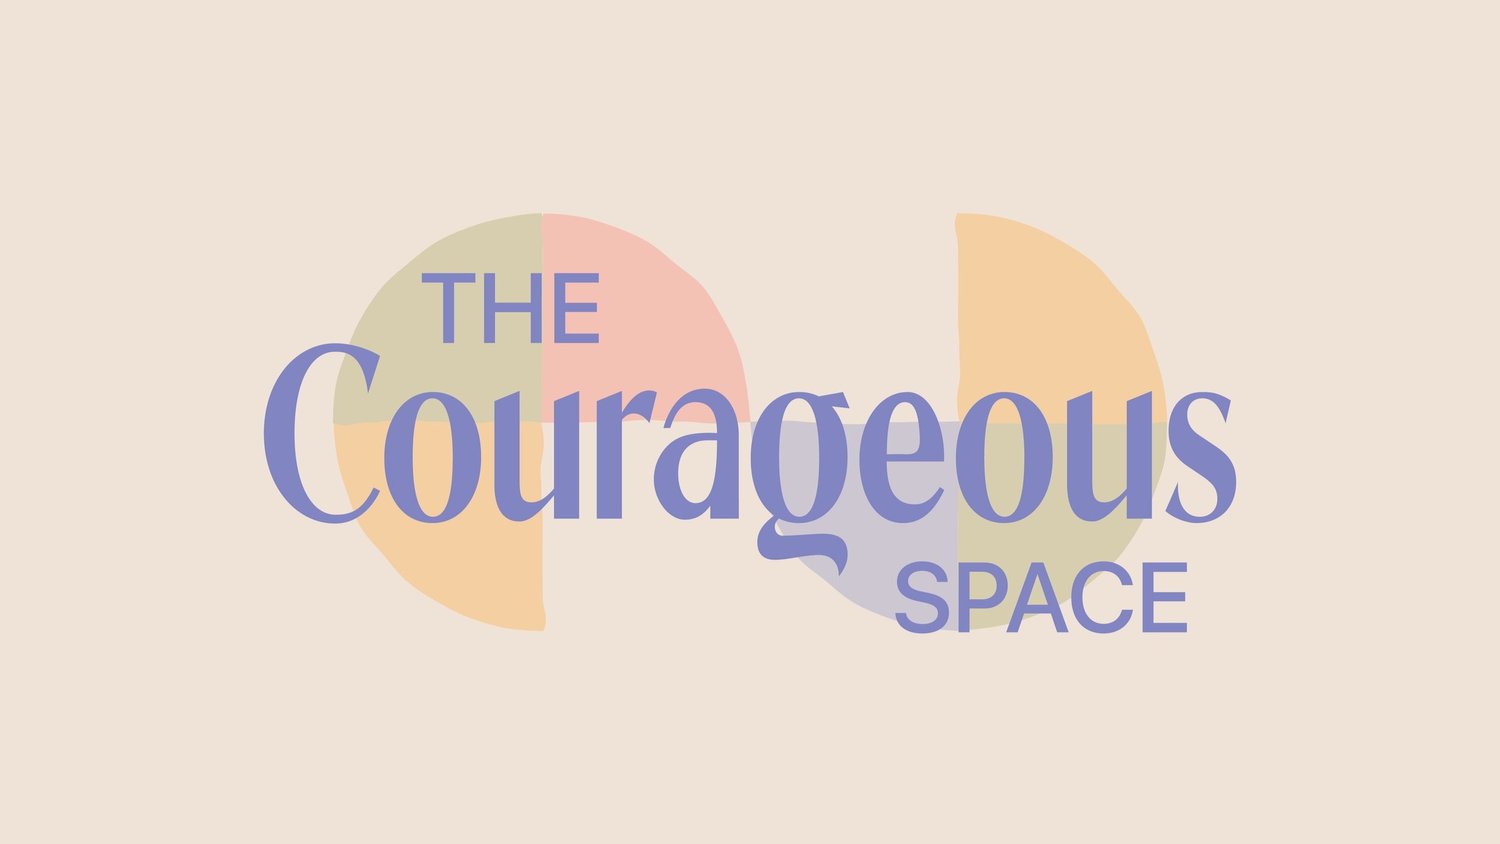 The Courageous Space logo